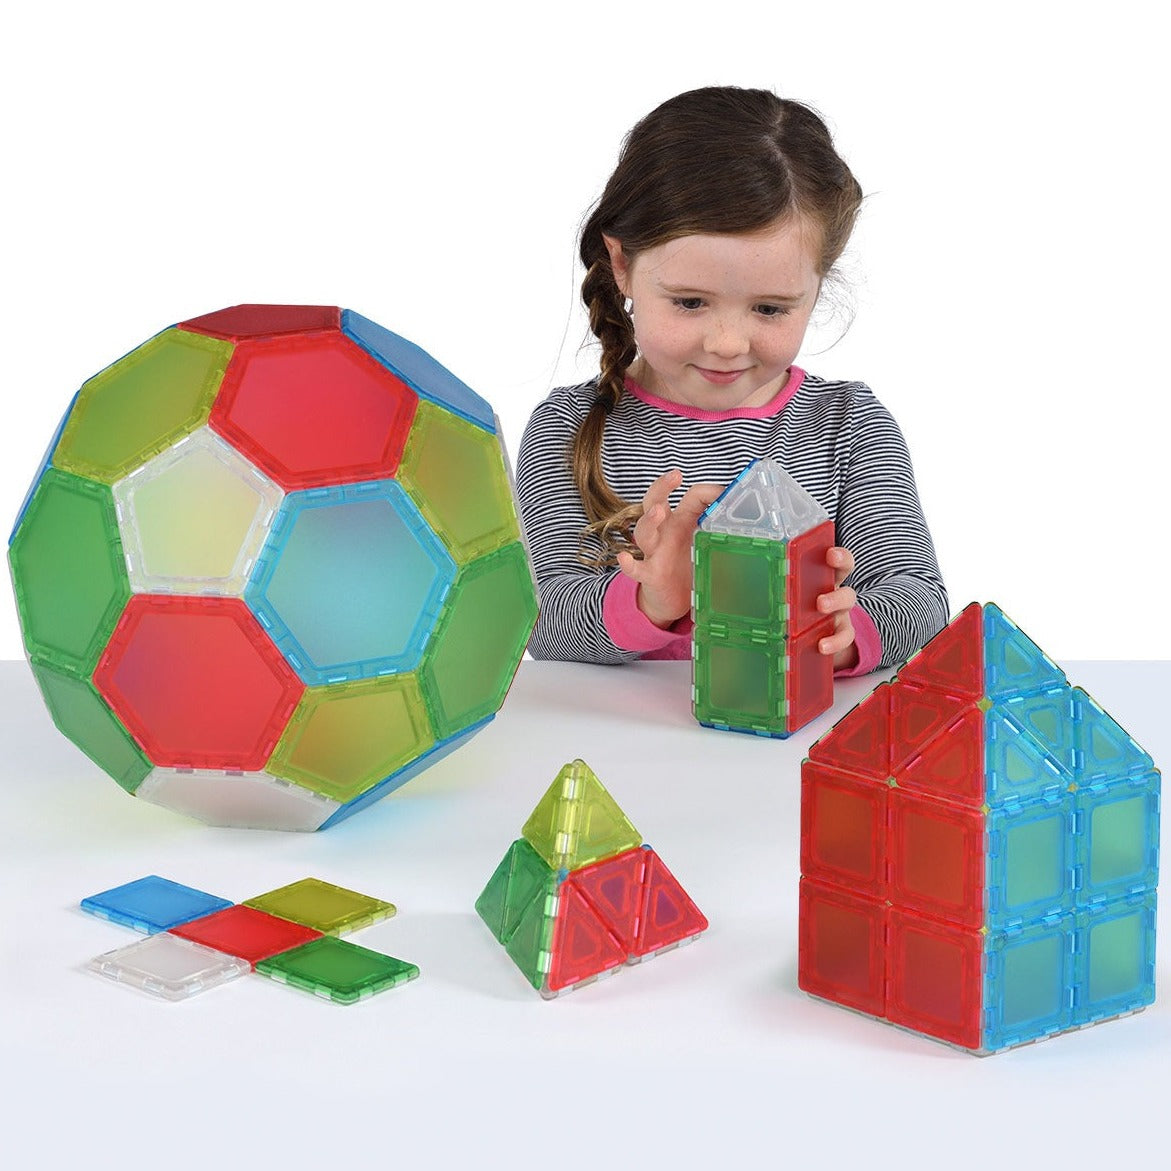 Translucent Solid Magnetic Polydron Essential Shapes Set, Introduce a new dimension of creativity and learning with the Translucent Solid Magnetic Polydron Essential Shapes Set. With 104 pieces, including squares, equilateral triangles, pentagons, and hexagons, this set is perfect for building more complex shapes and teaching geometry, construction, and polarity to larger groups of children.These translucent pieces are supplied in five appealing colors, adding a captivating visual element to creations. The 